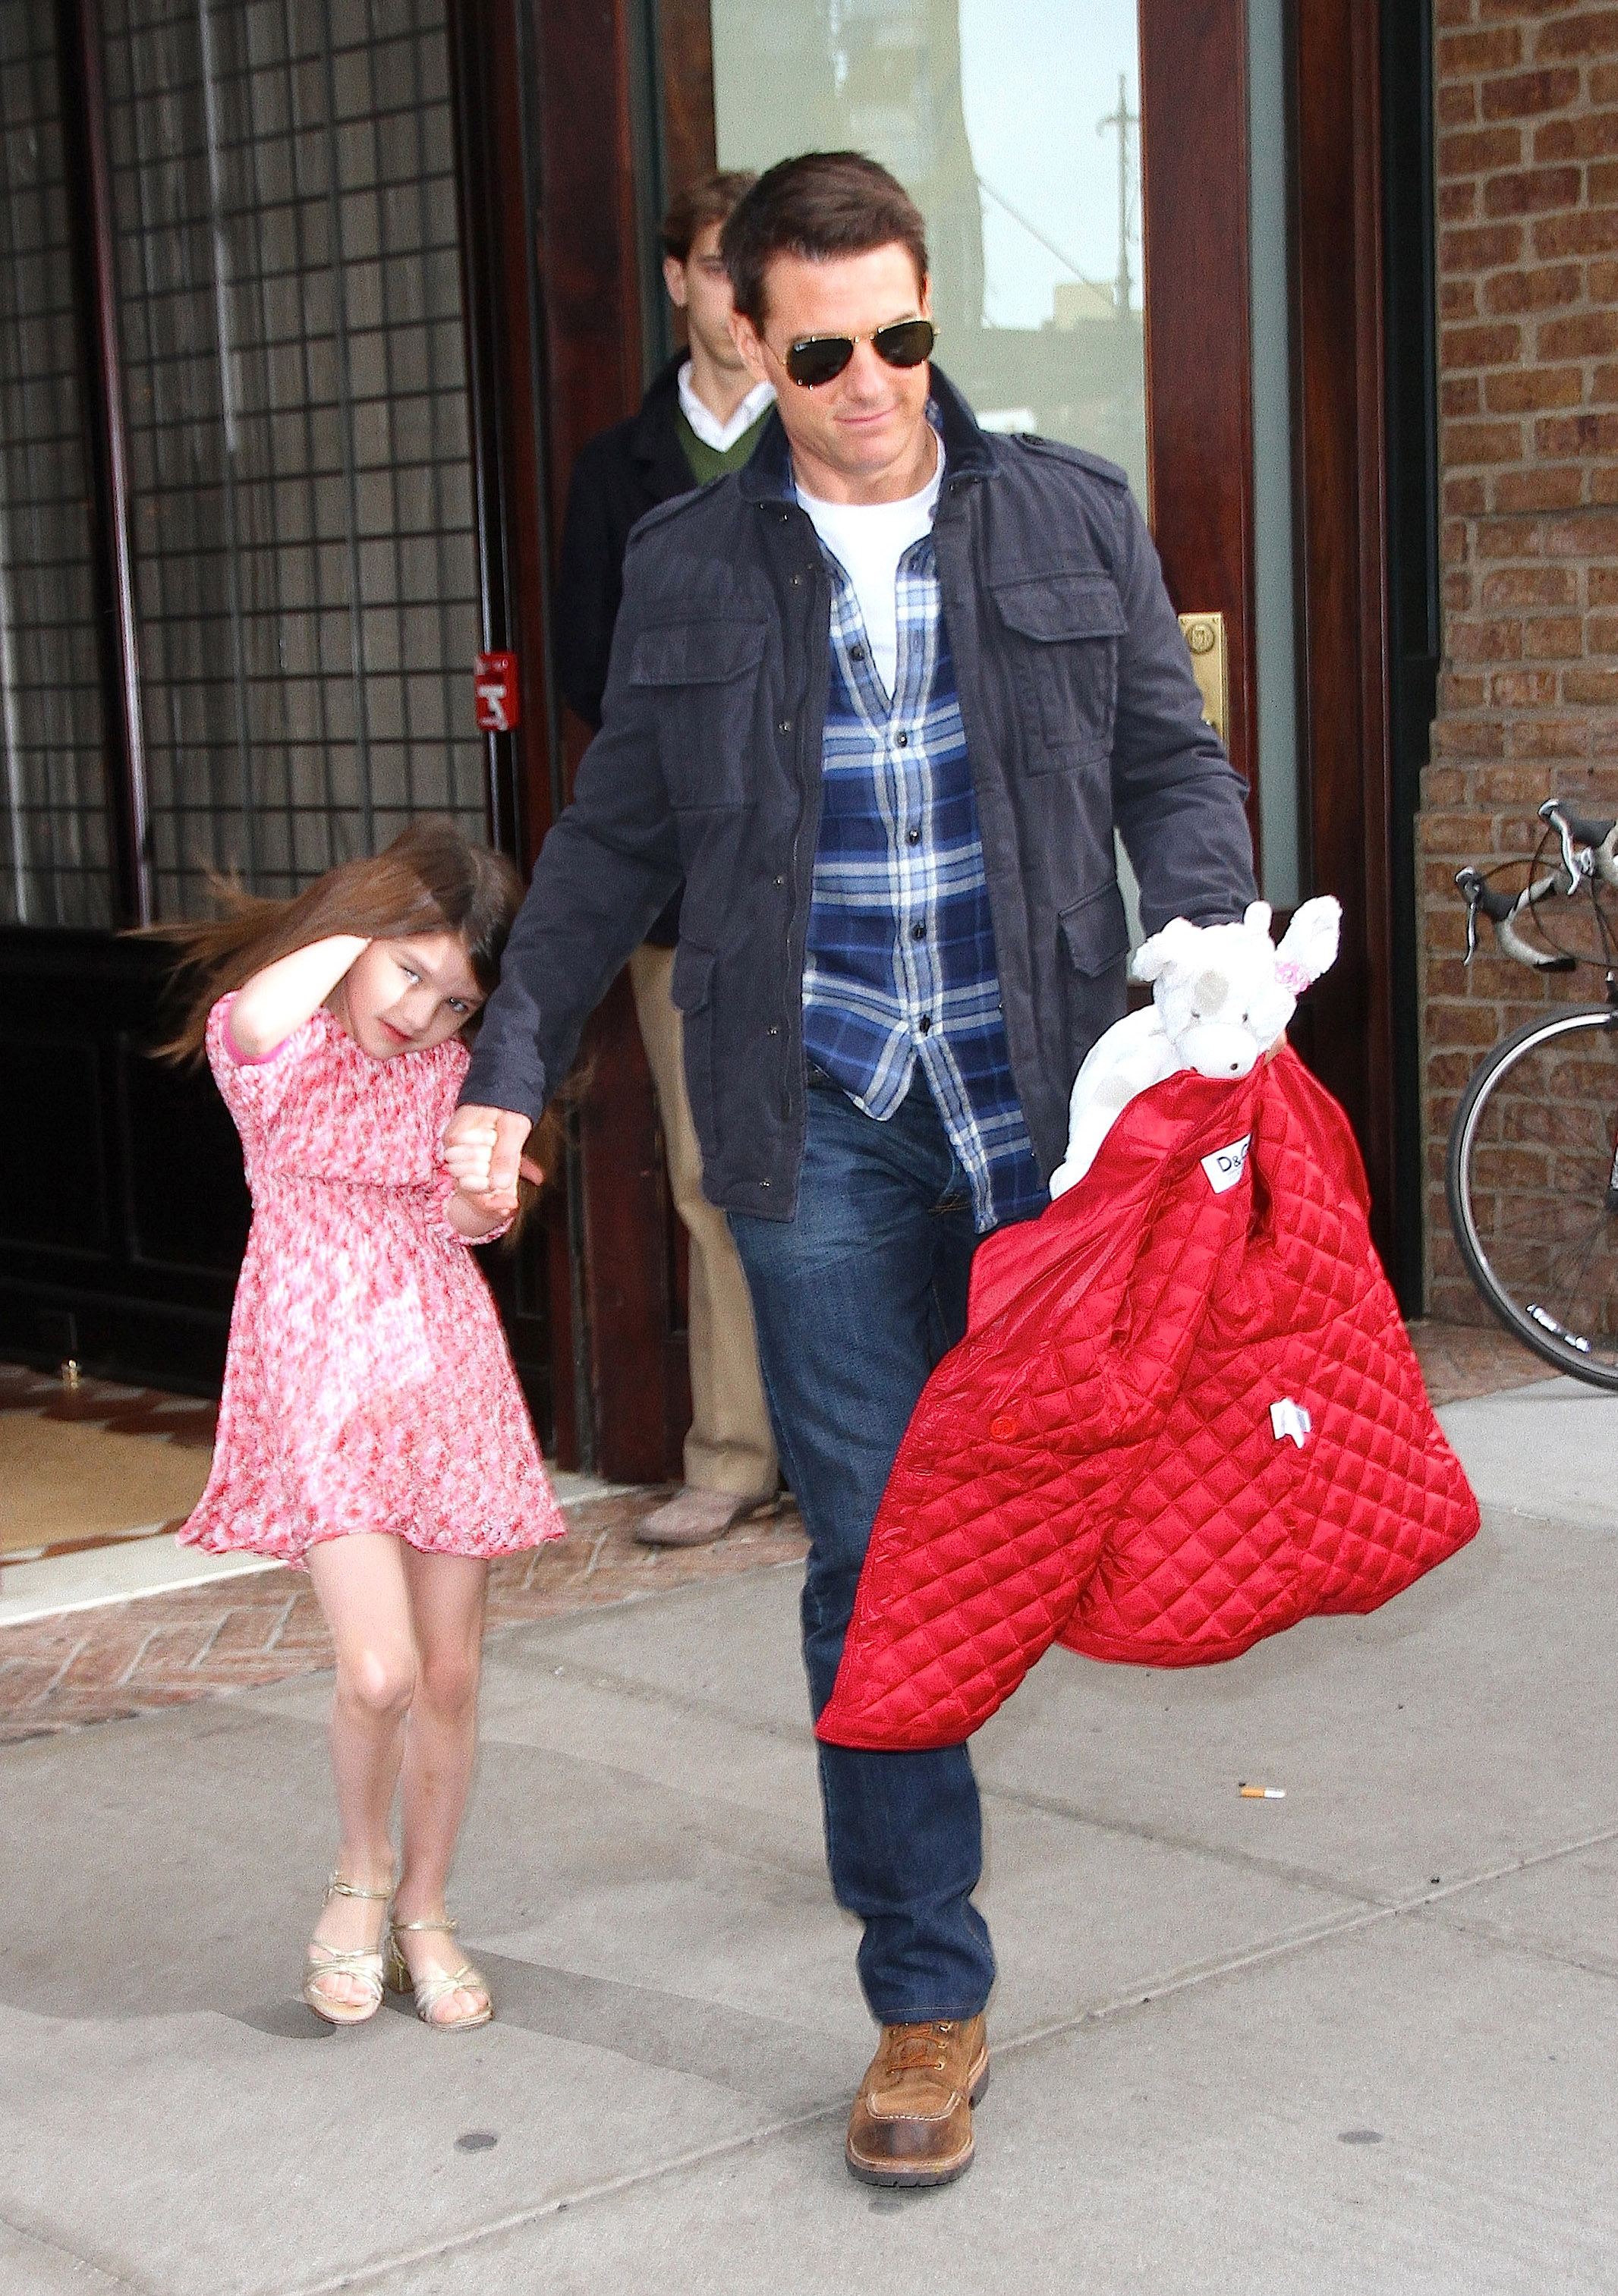 Suri Cruise and Tom Cruise are seen in New York City on December 16, 2011. | Source: Getty Images